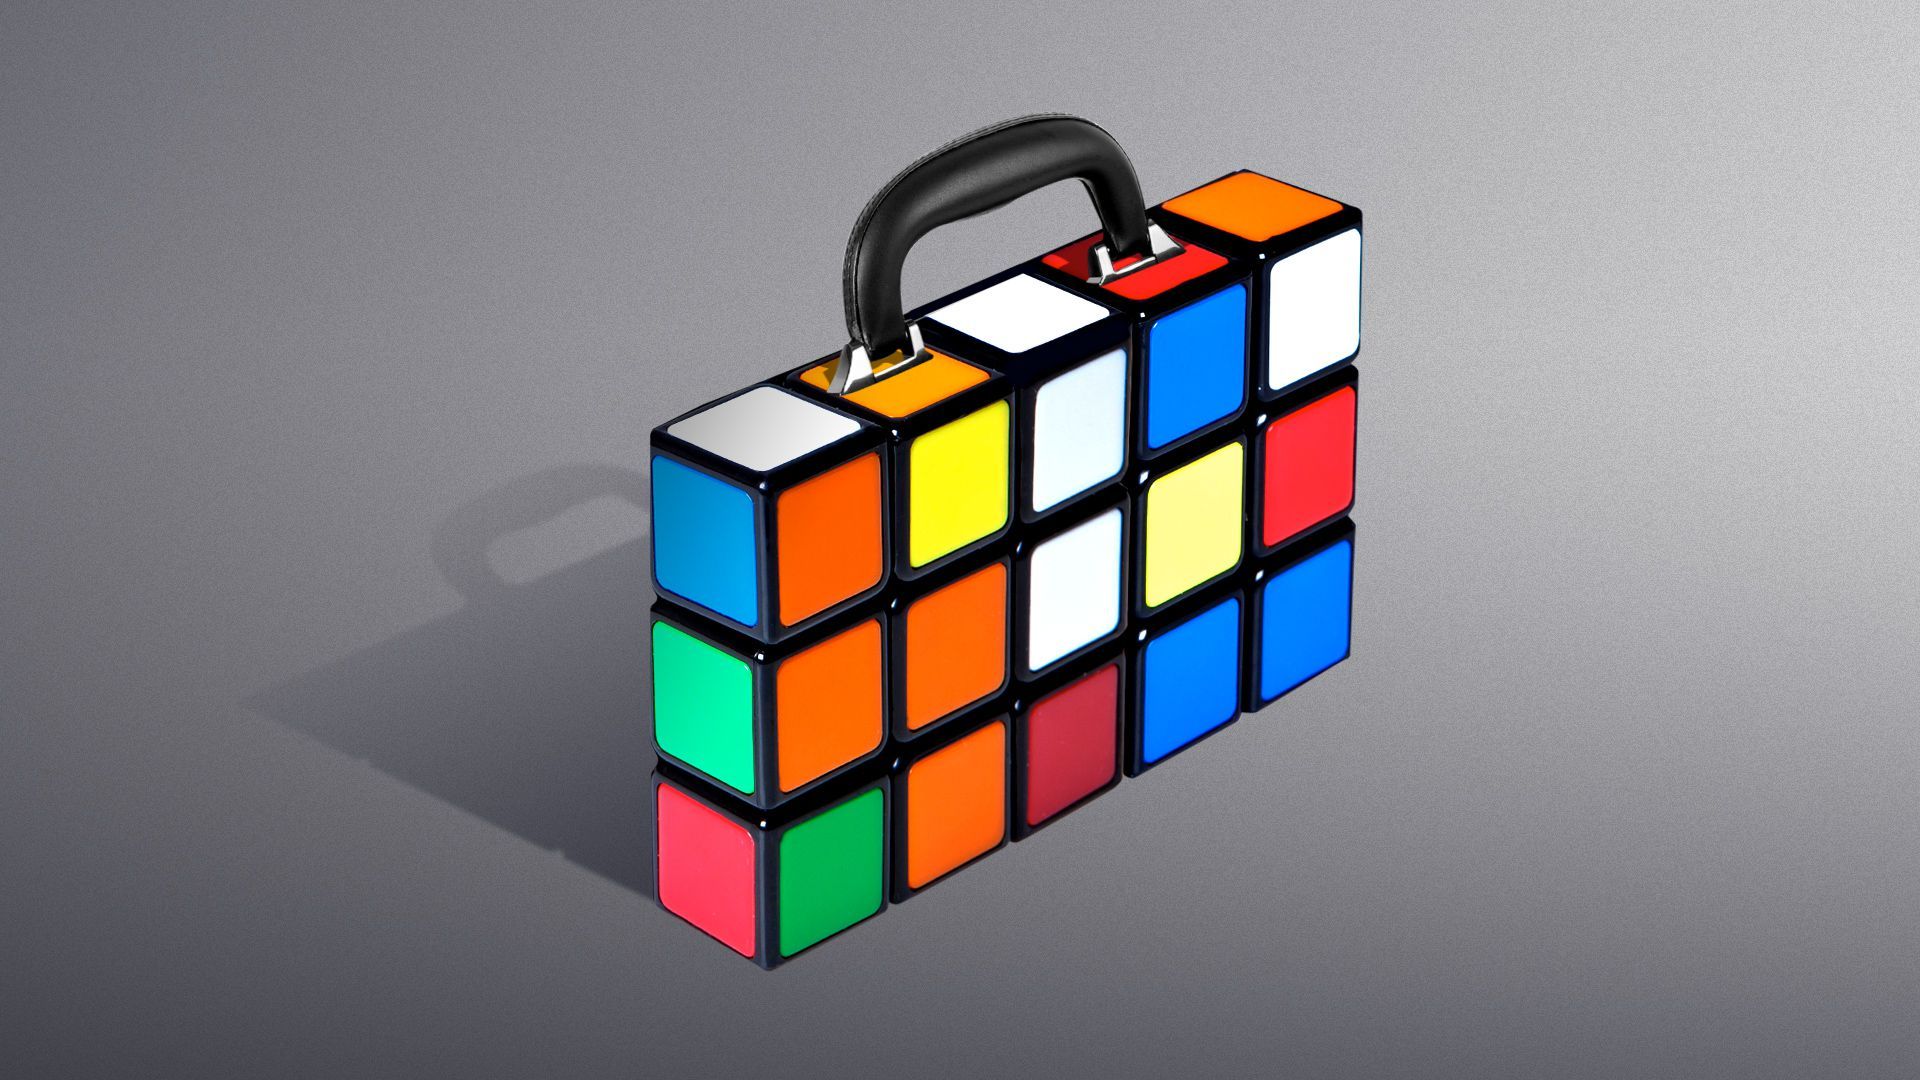 Illustration of a thin, rectangle shaped Rubik's cube stylized as a briefcase.  